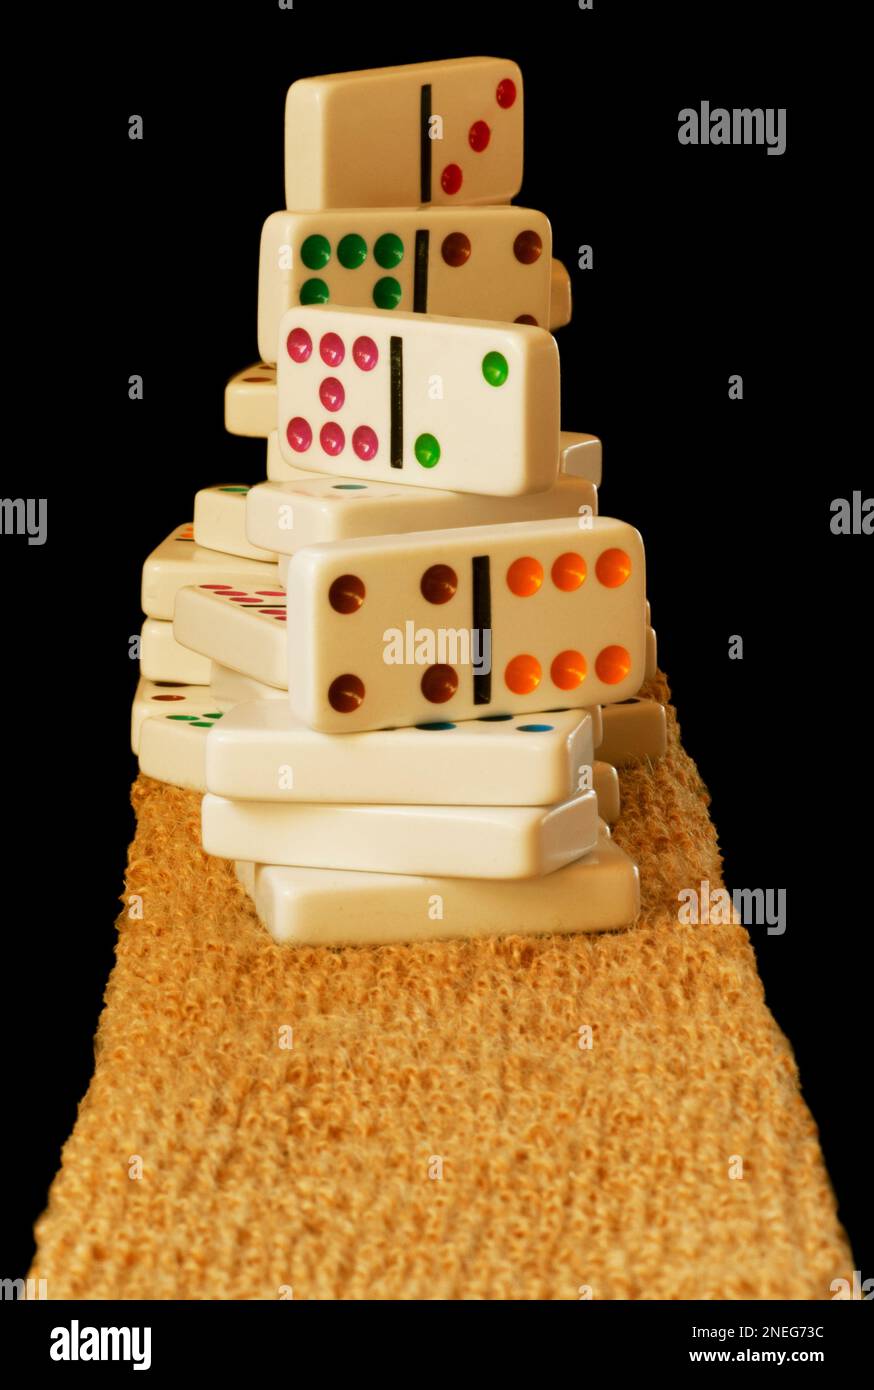 Dominoes with colorful dots are stacked high in a pile on a coco mat material. Isolate image has room for text. Tiles are clean and new. Stock Photo